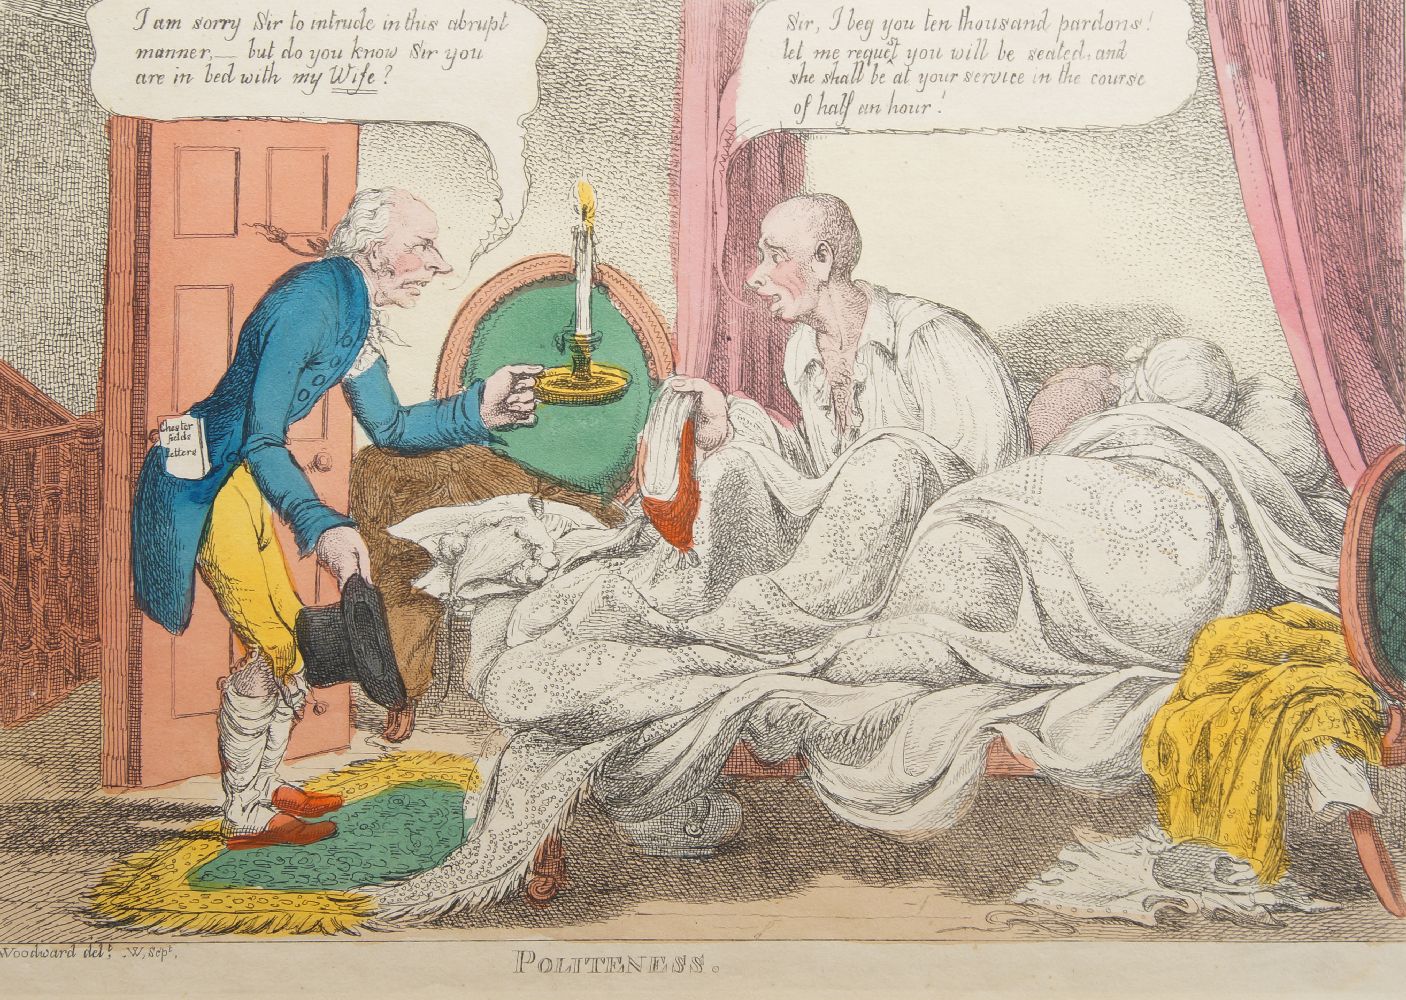 George Moutard Woodward, British 1760-1809- Politeness; hand-coloured etching, published 1807-1821